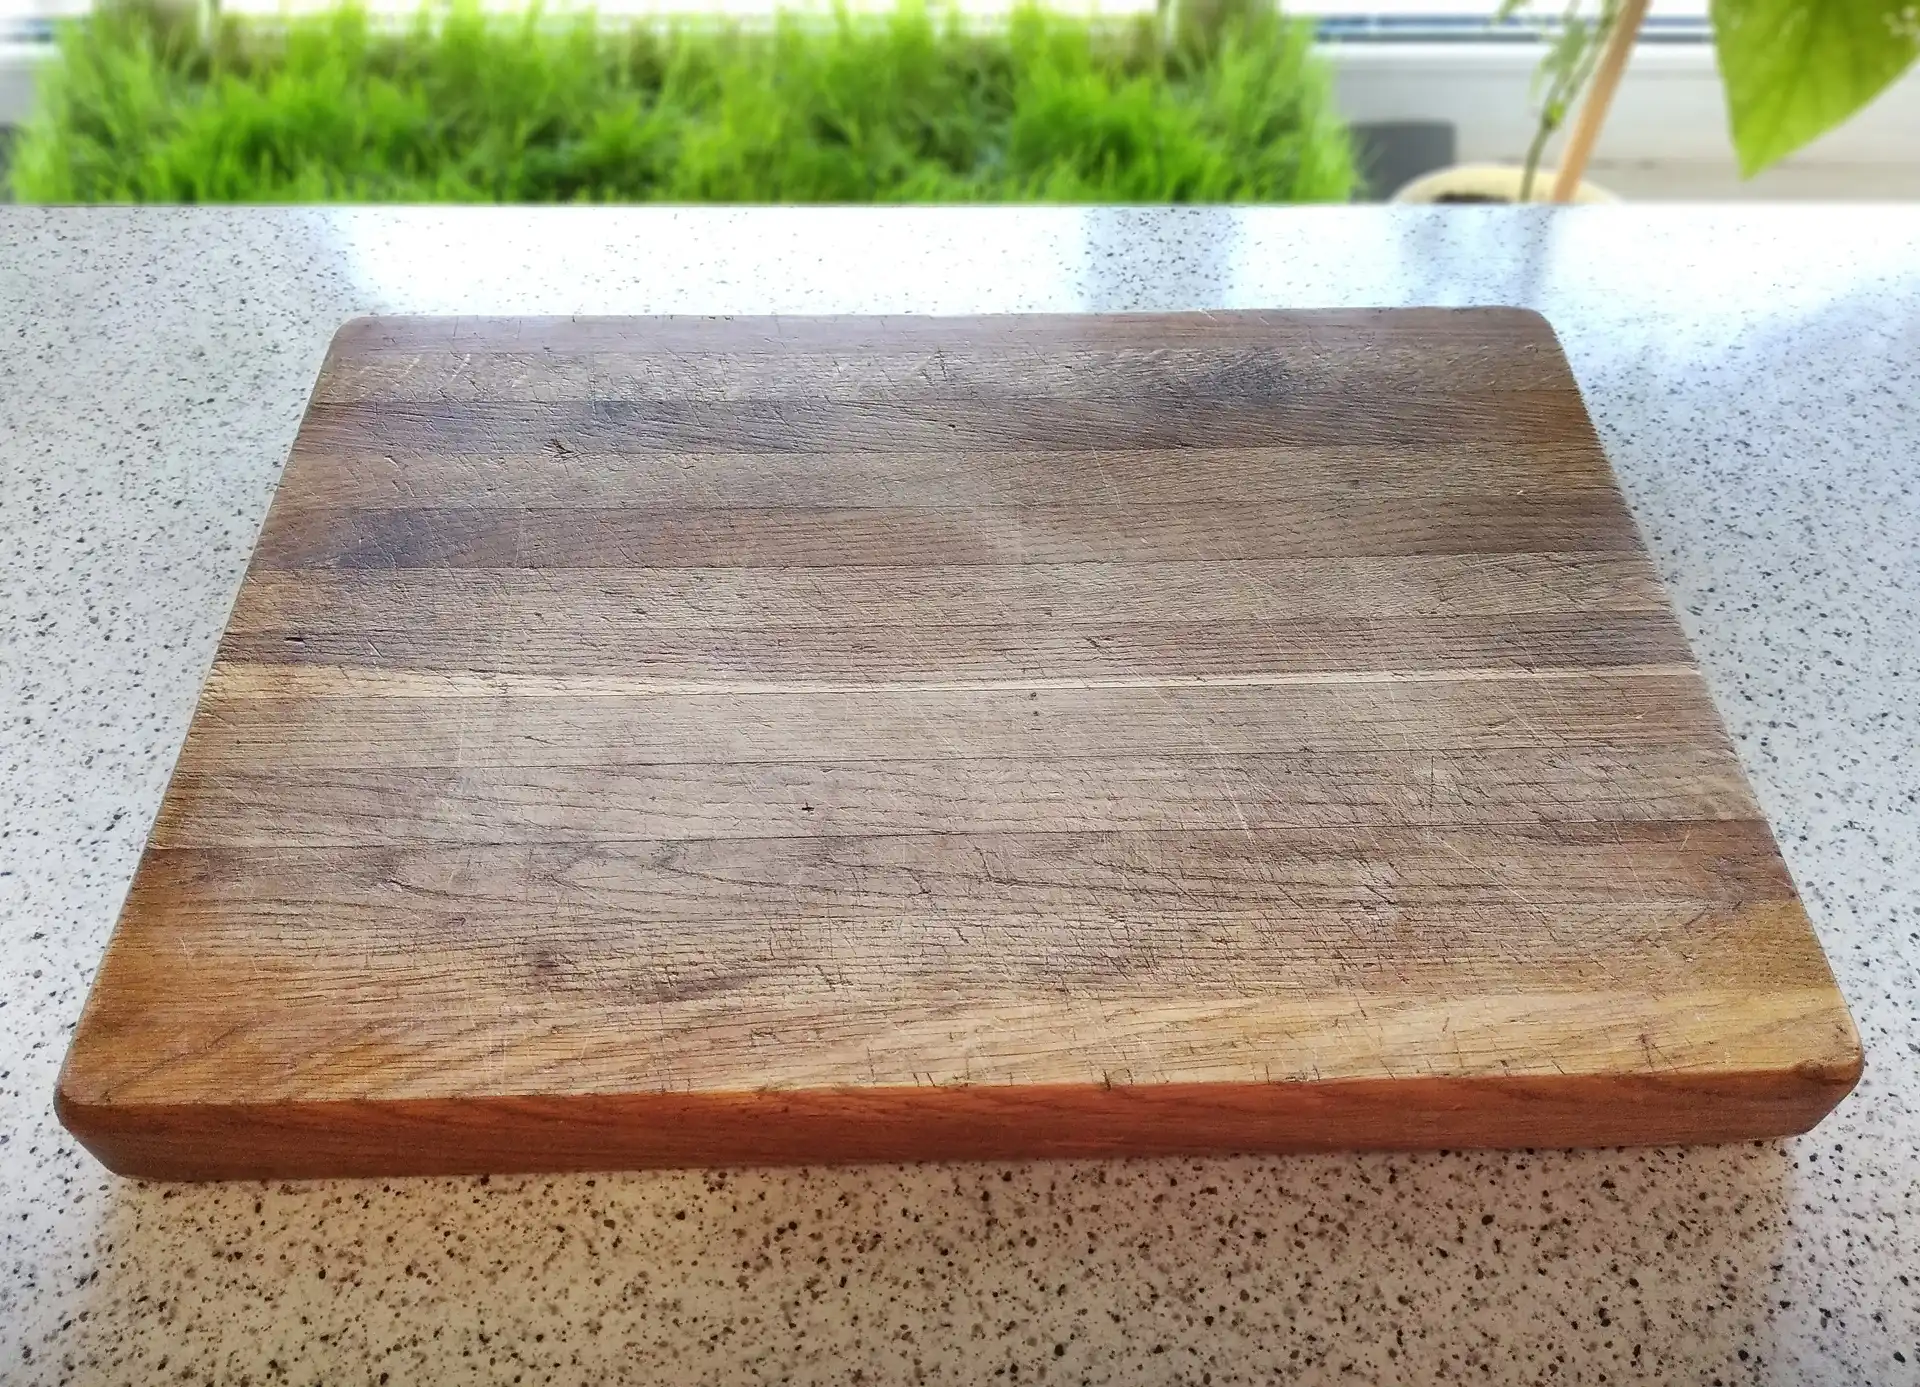 Real photo of a used cutting board in the kitchen environment, which lies on the table. This particular chopping-board was used to scan wood texture from.